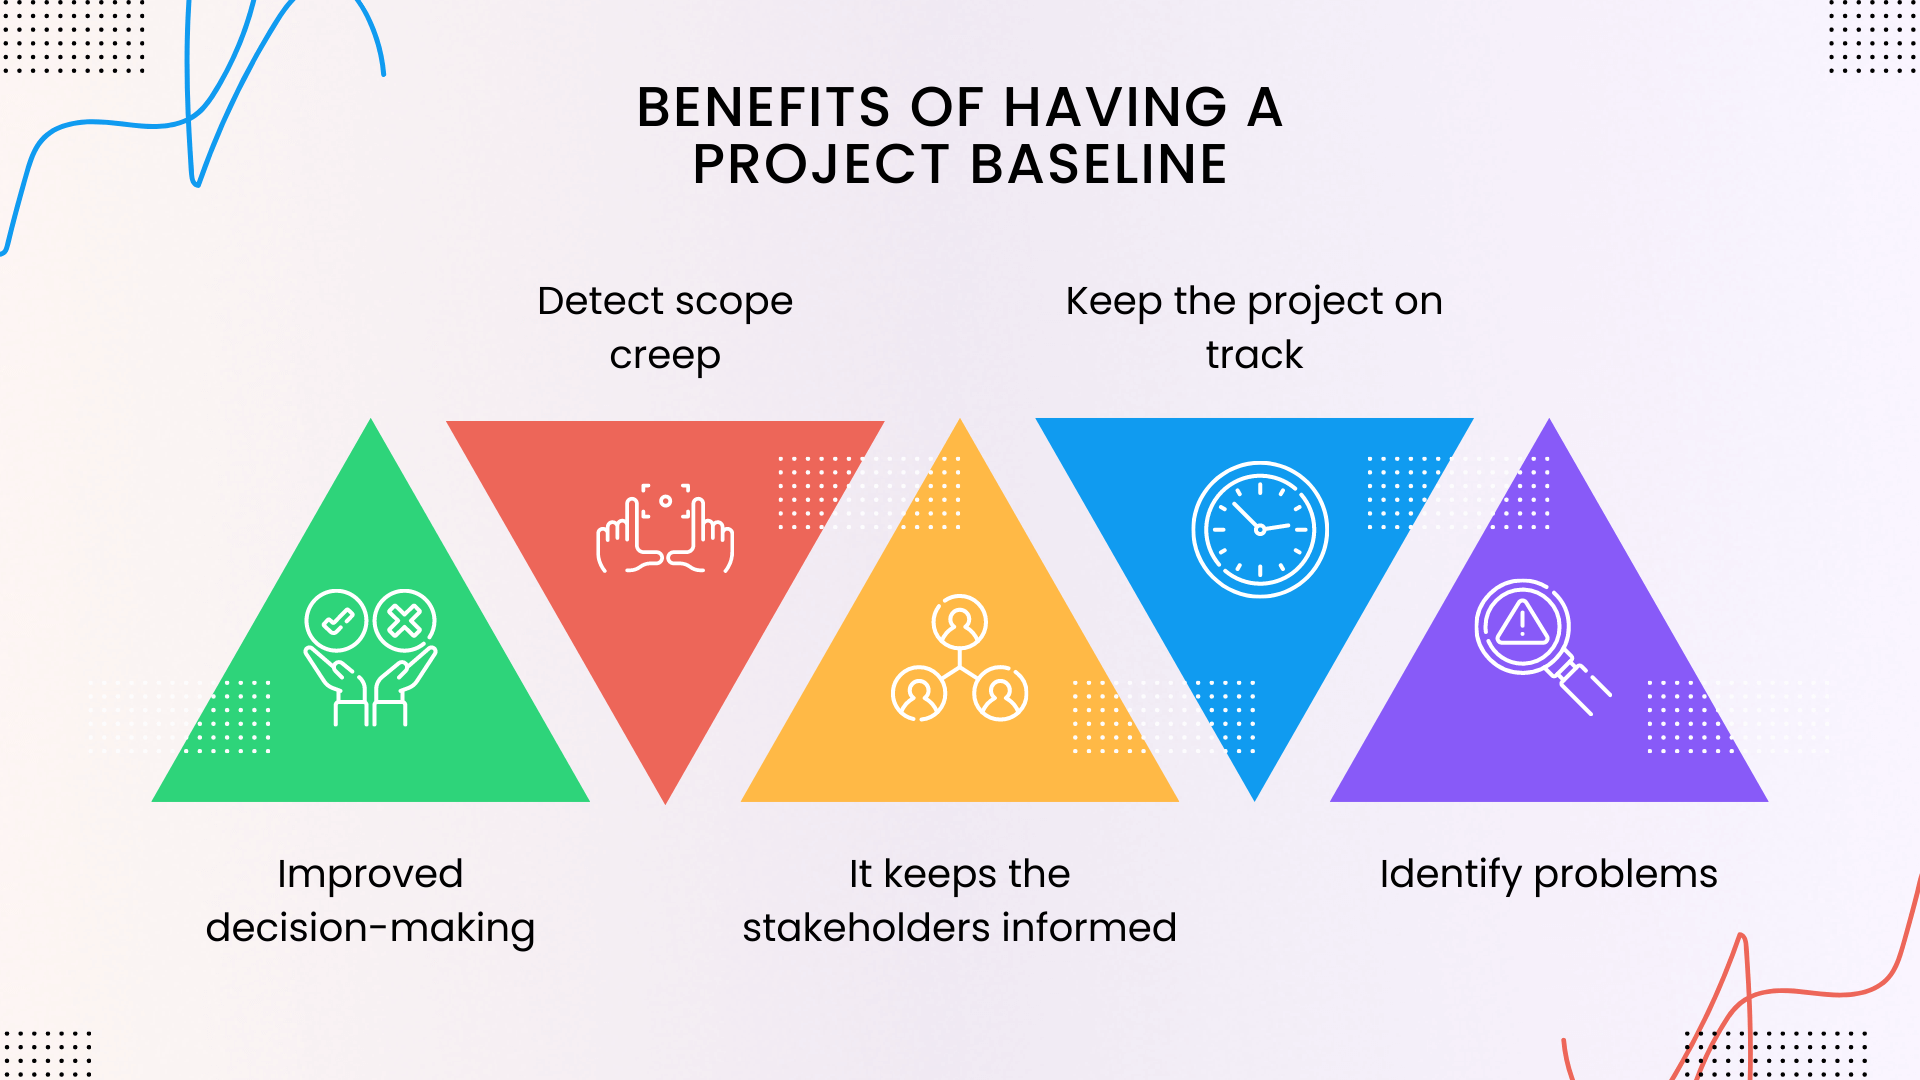 Benefits of Having a Project Baseline